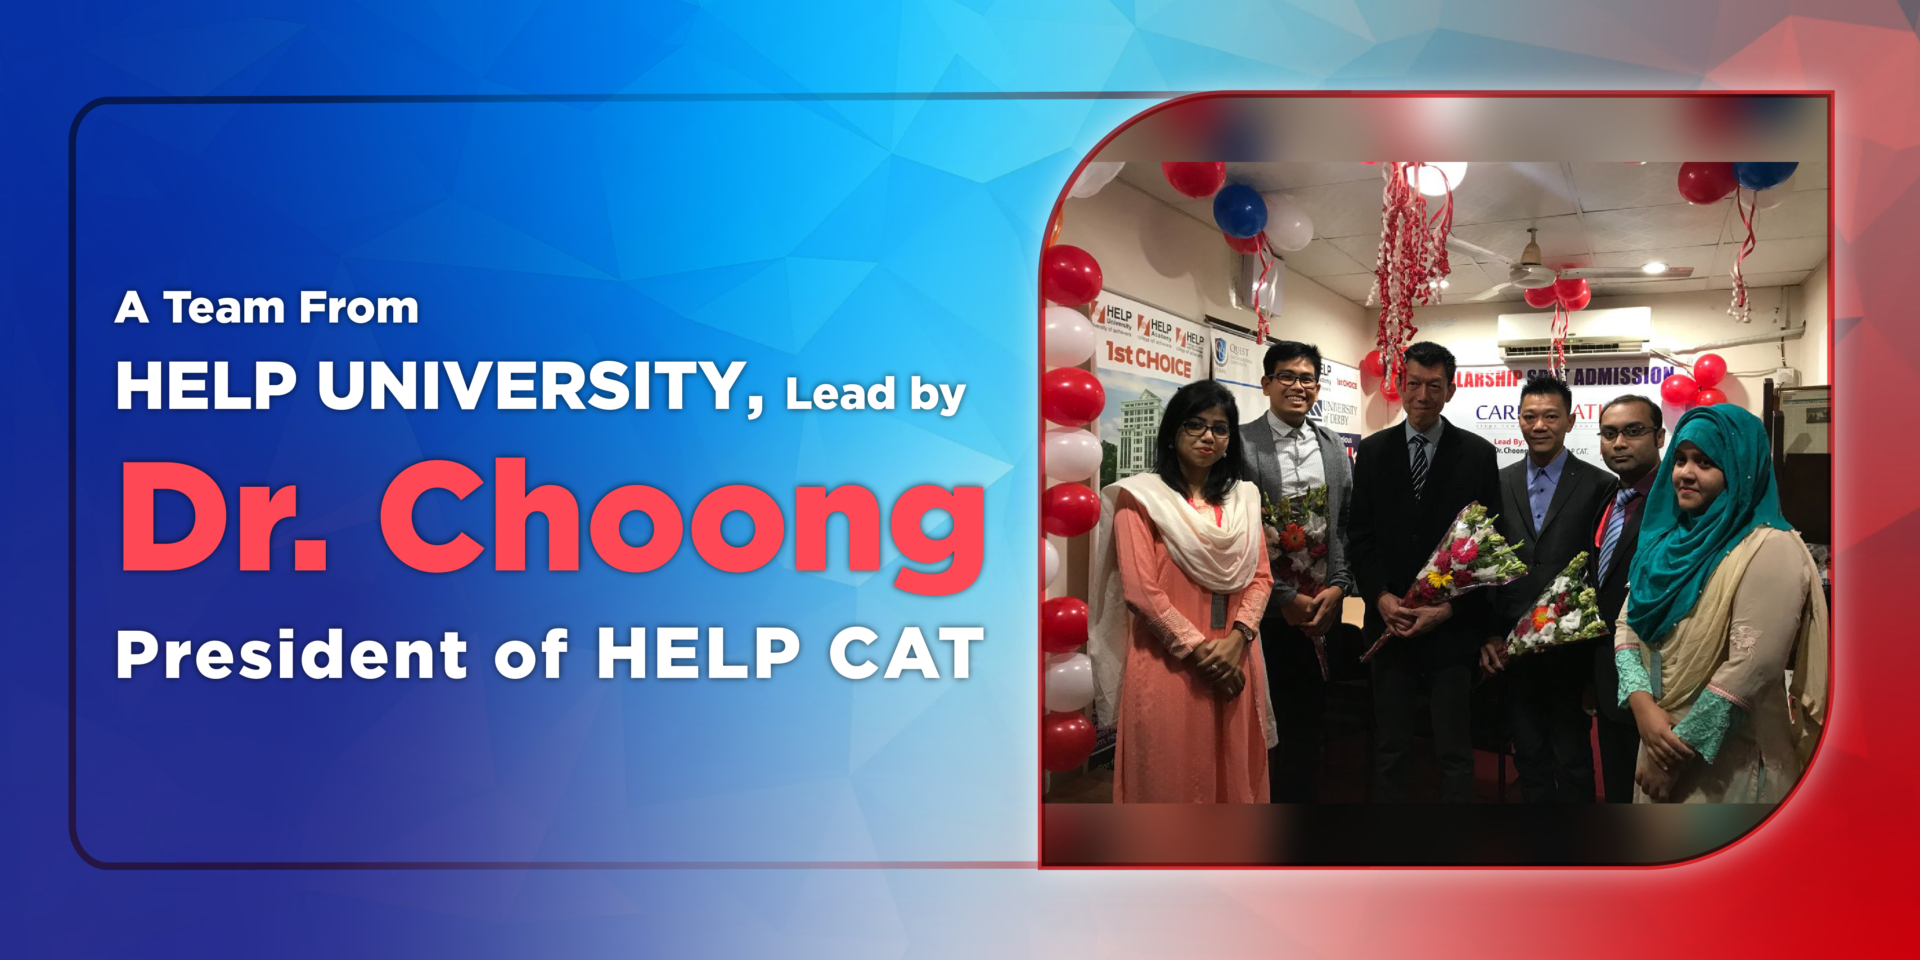 A team from HELP UNIVERSITY, Lead by Dr. Choong, President of HELP CAT